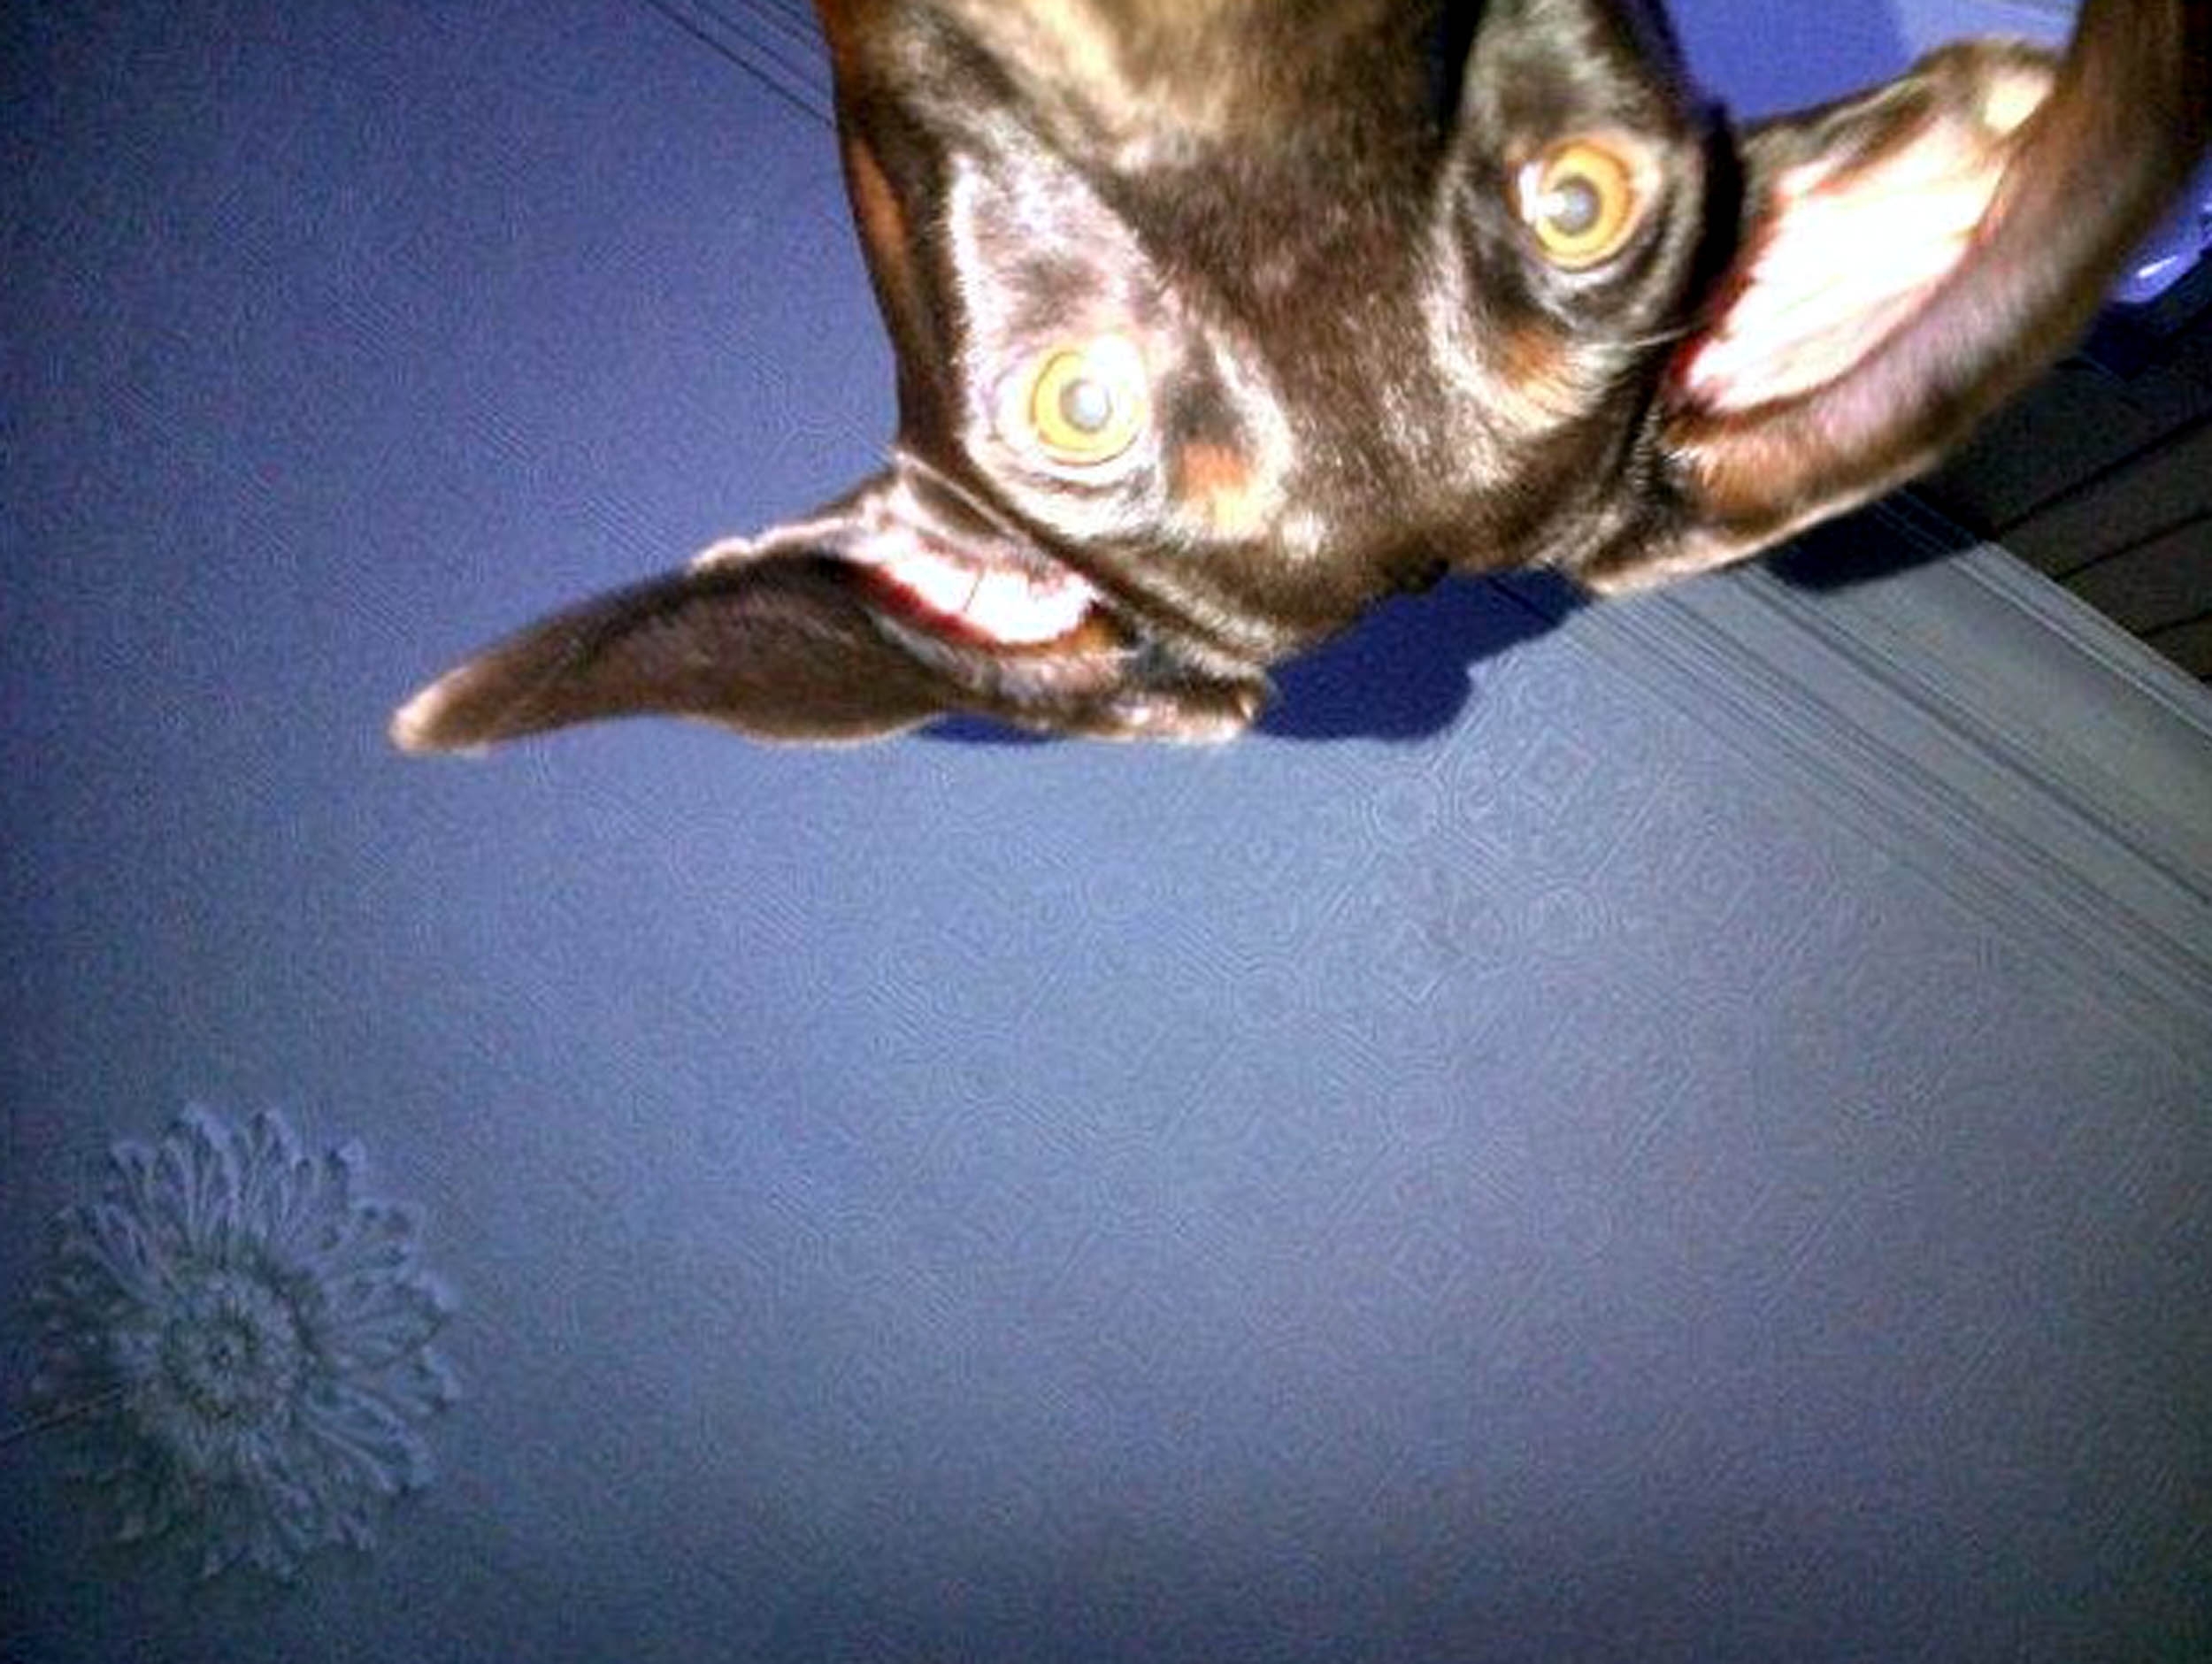 Dog stood on phone PETS across the globe are getting in on the selfie phenomenon. Curious cats, dopey dogs and even ham-fisted hamsters are snapping themselves on their owners mobiles - with hilarious results. The pictures, which include a close-up of a one-eyed cat, all were produced when clumsy pets stood on their owners phones or iPads. The results are varied - some pictures show cats looking down into the camera with their chin appearing extremely enlarged, and in others a dogs nose takes up most of the photo.